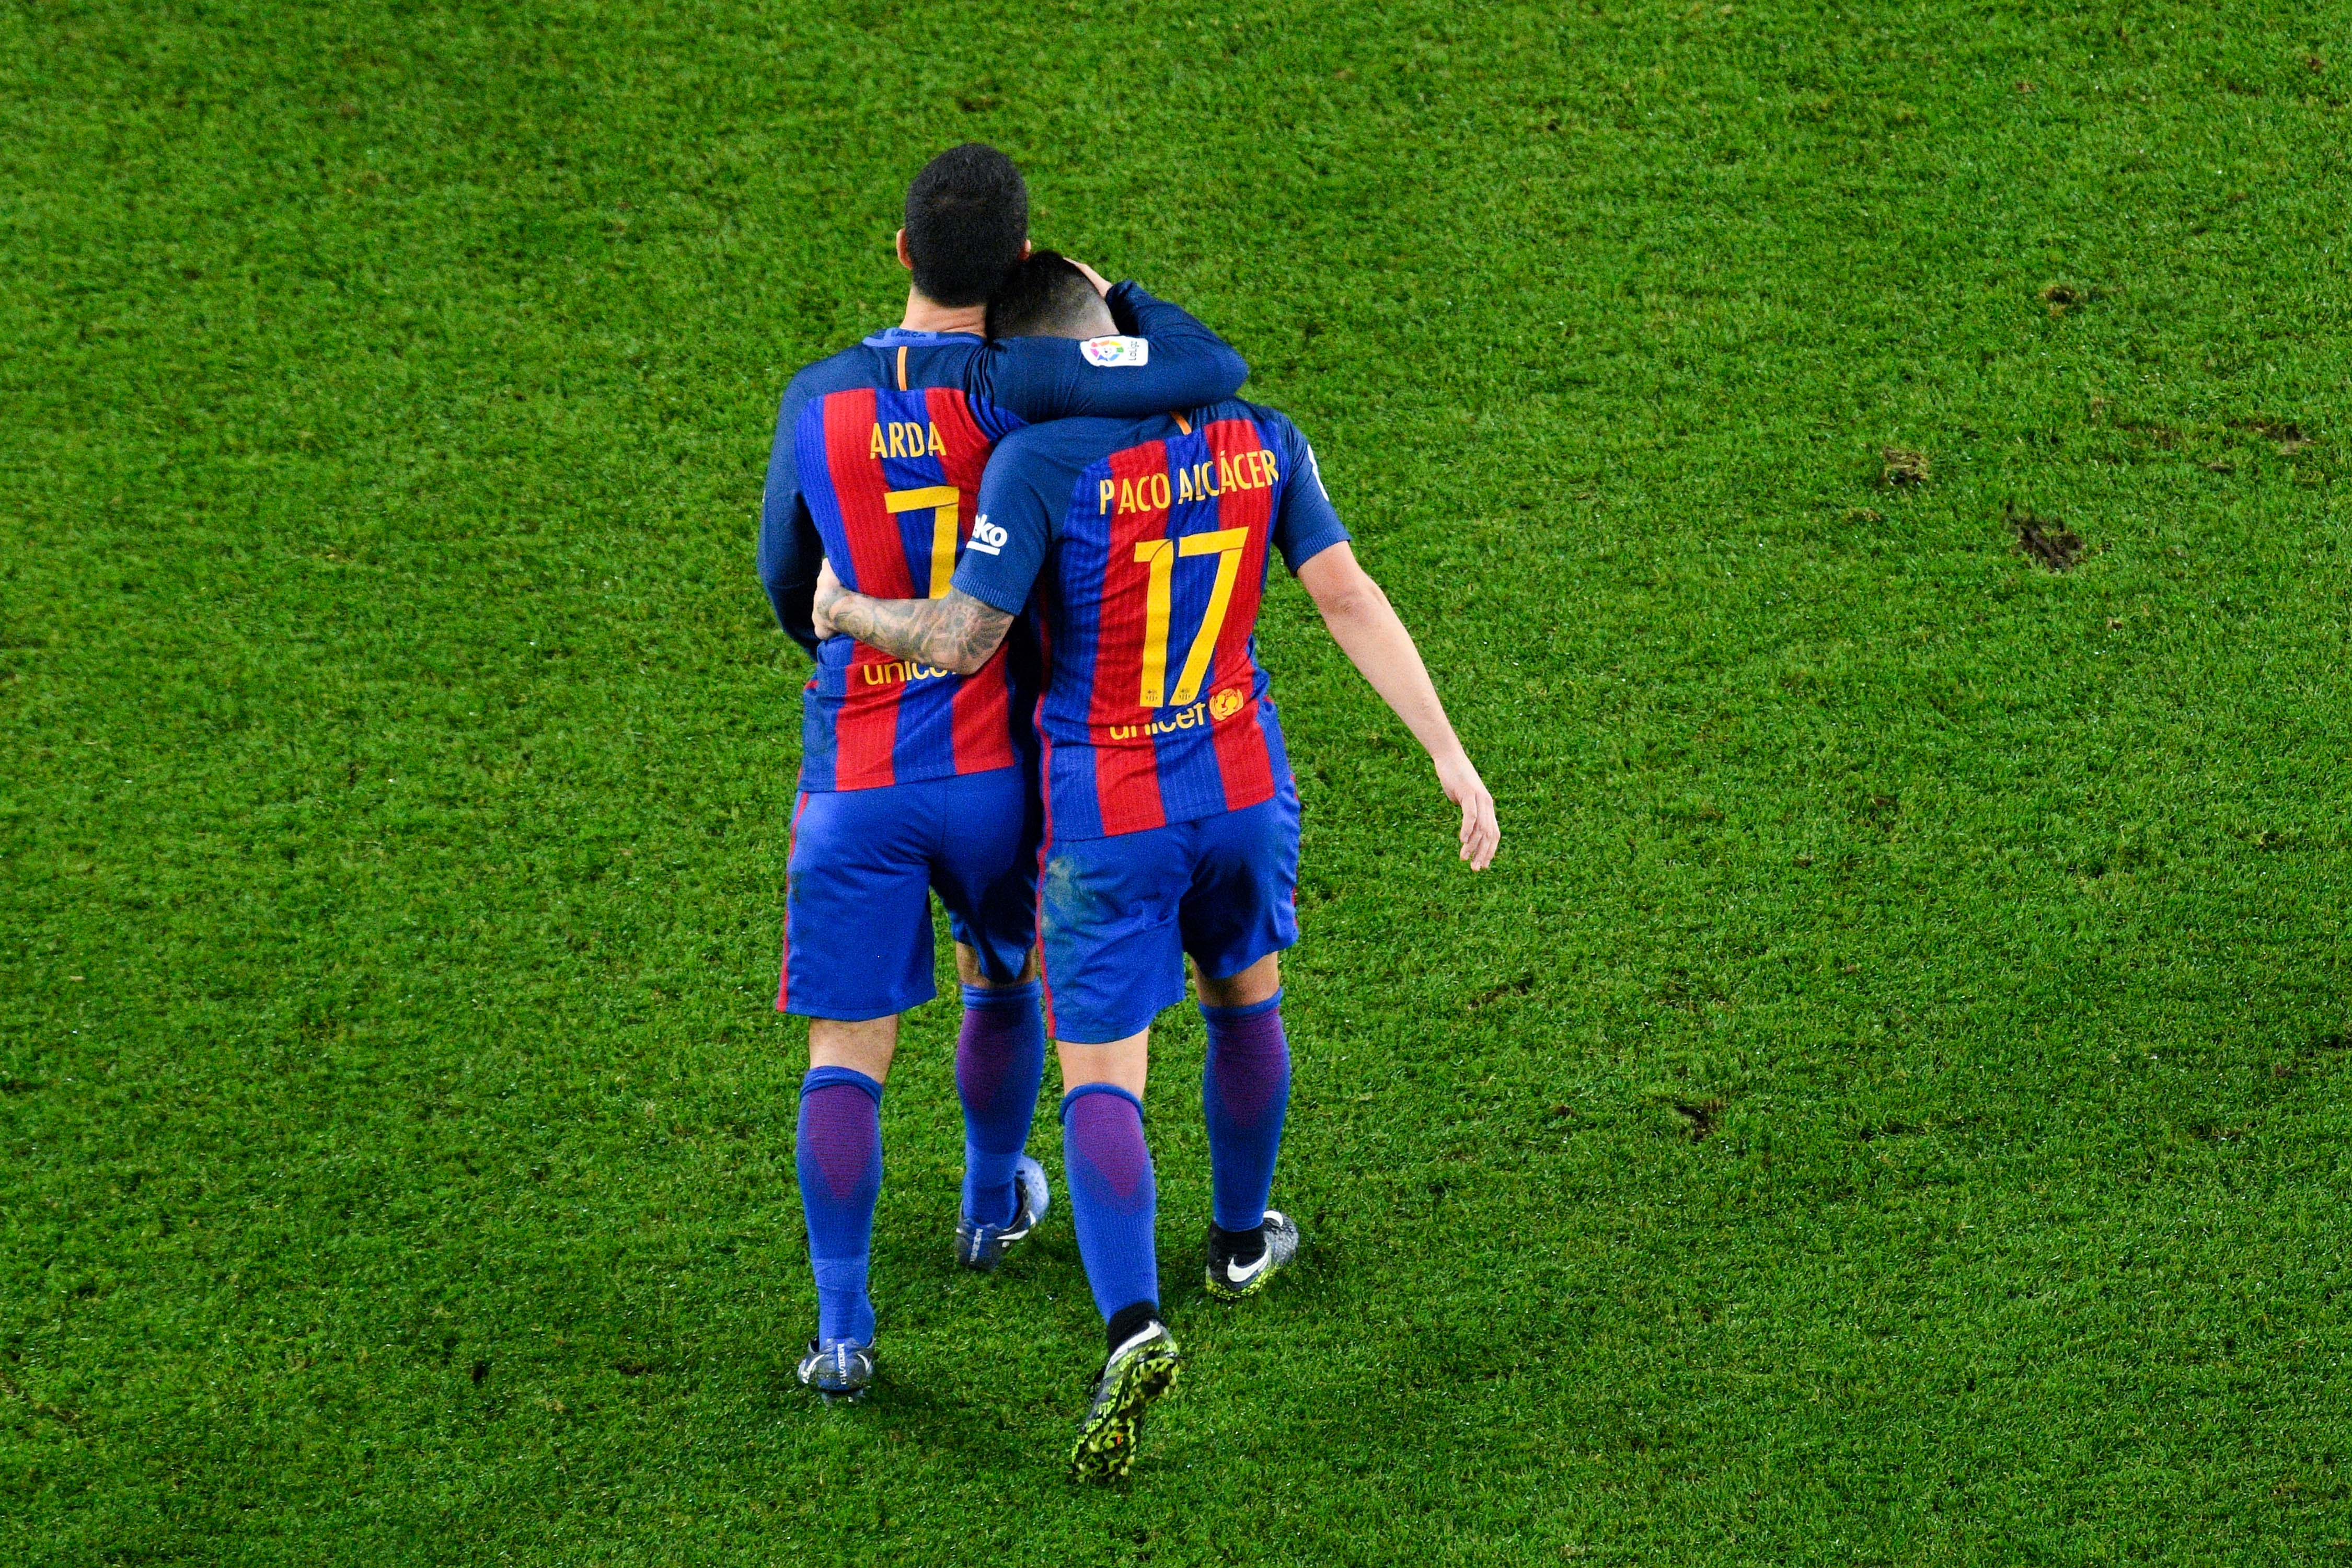 BARCELONA, SPAIN - DECEMBER 21:  Paco Alcacer of FC Barcelona celebrates with his team mate Ardan Turan after scoring his team's fifth goal during the Copa del Rey round of 32 second leg match between FC Barcelona and Hercules at Camp Nou on December 21, 2016 in Barcelona, Spain.  (Photo by David Ramos/Getty Images)